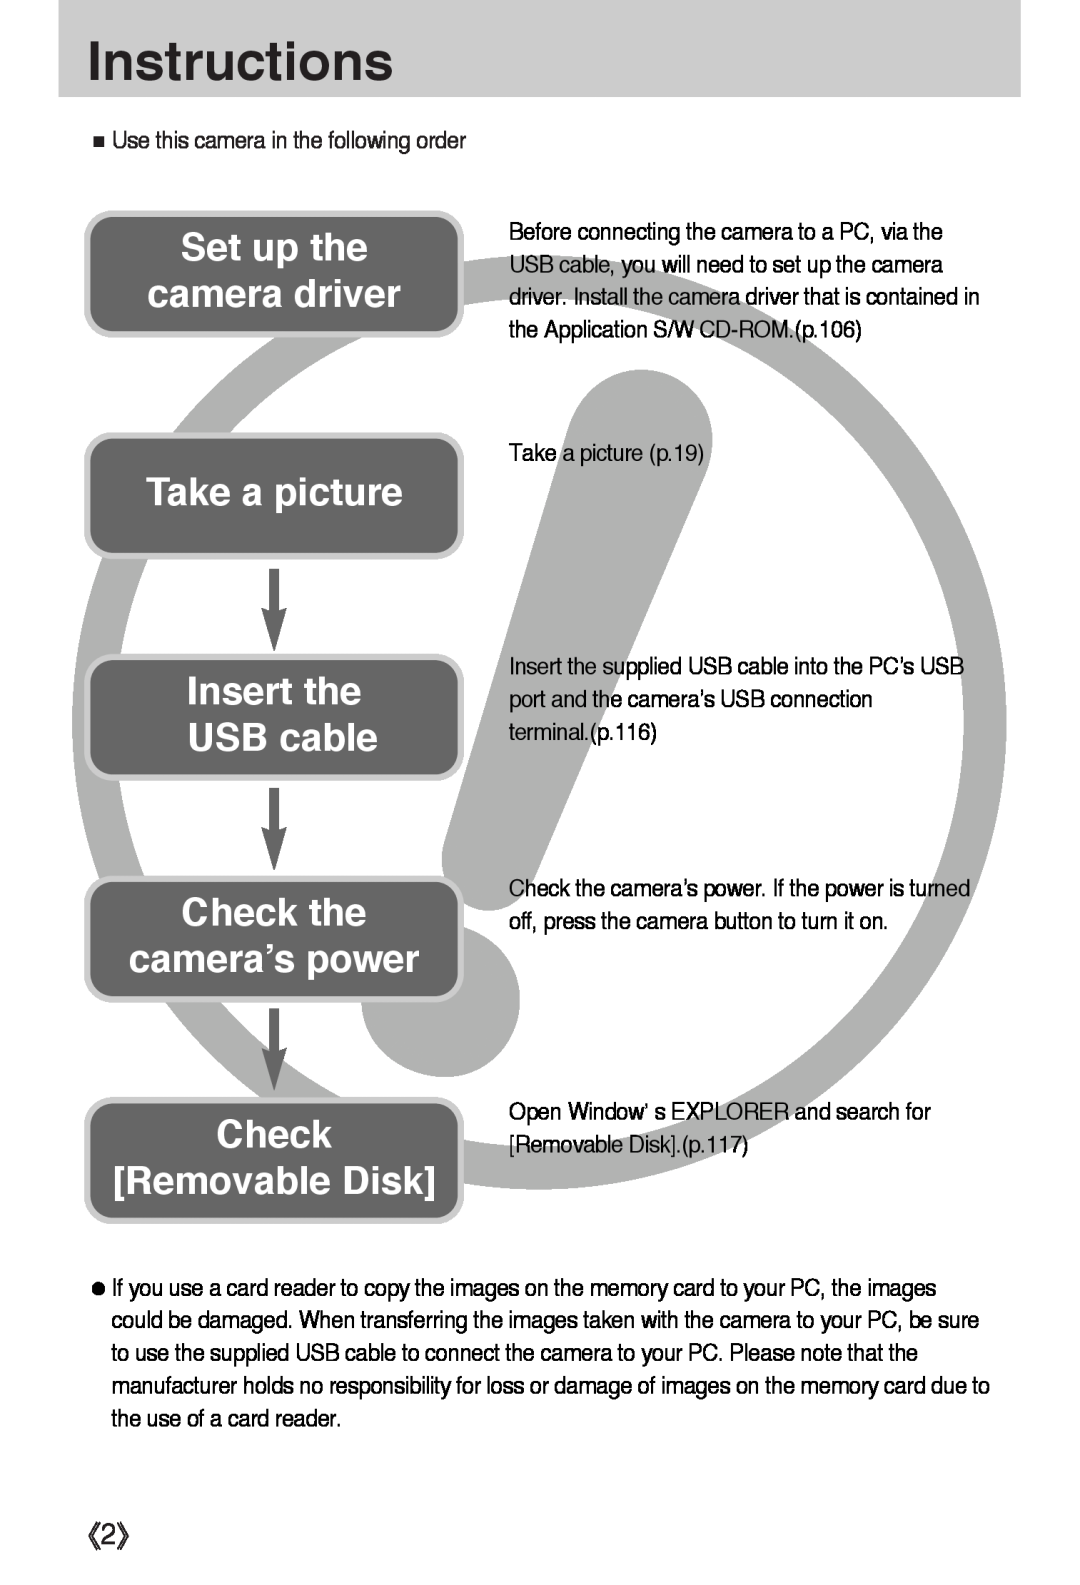 Samsung L50 user manual Instructions, Set up the camera driver Take a picture Insert the USB cable 